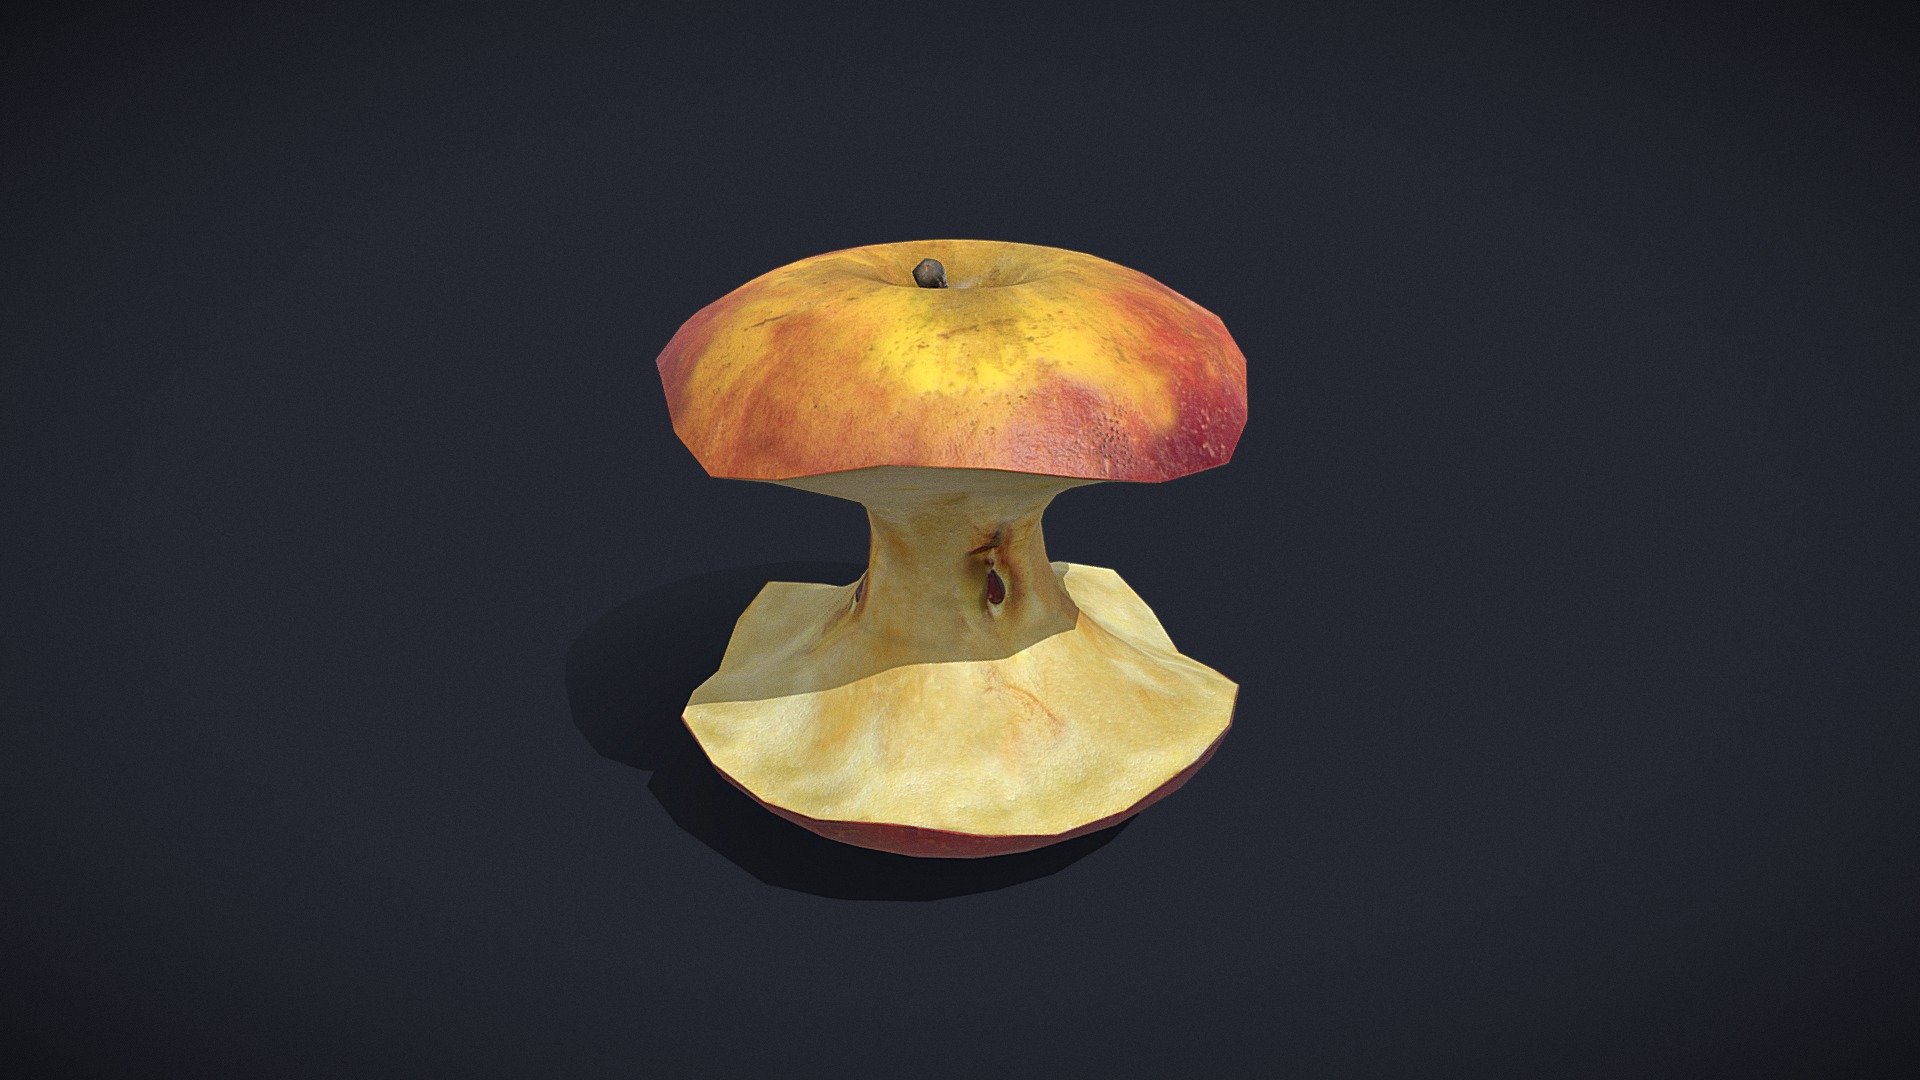 Apple Core High Quality 3D Model PBR Texture available
Customer Service Guaranteed. From the Creators at Get Dead Entertainment. Please like and Rate! Follow us on FaceBook and Instagram to keep updated on all our newest models. https://www.facebook.com/GetDeadEntertainment/ - Apple_Core - Buy Royalty Free 3D model by GetDeadEntertainment 3d model